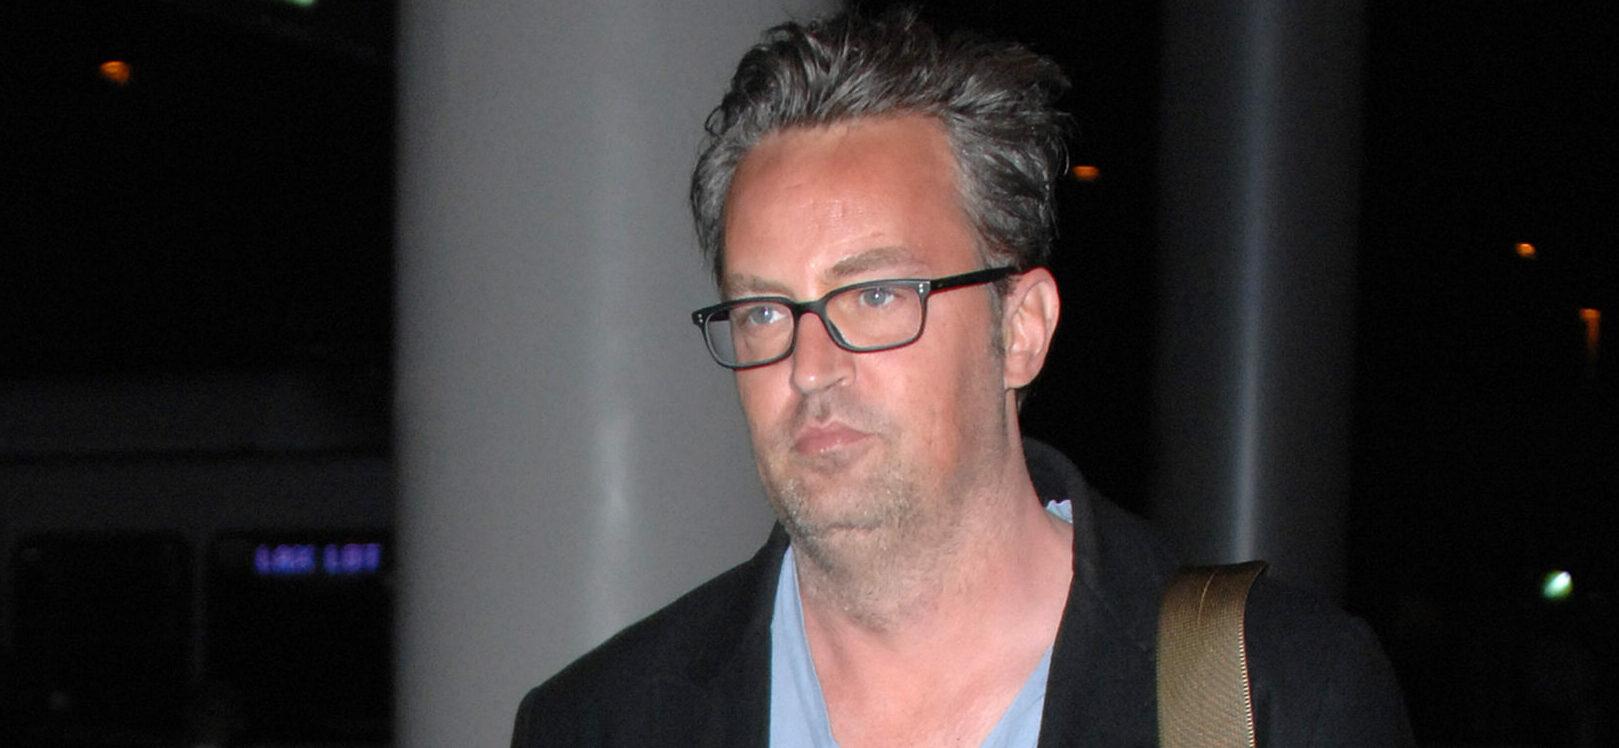 Matthew Perry’s AA Colleague Claims He Had ‘A Lot Of Enablers’ & Couldn’t Deal With ‘Tough Love’